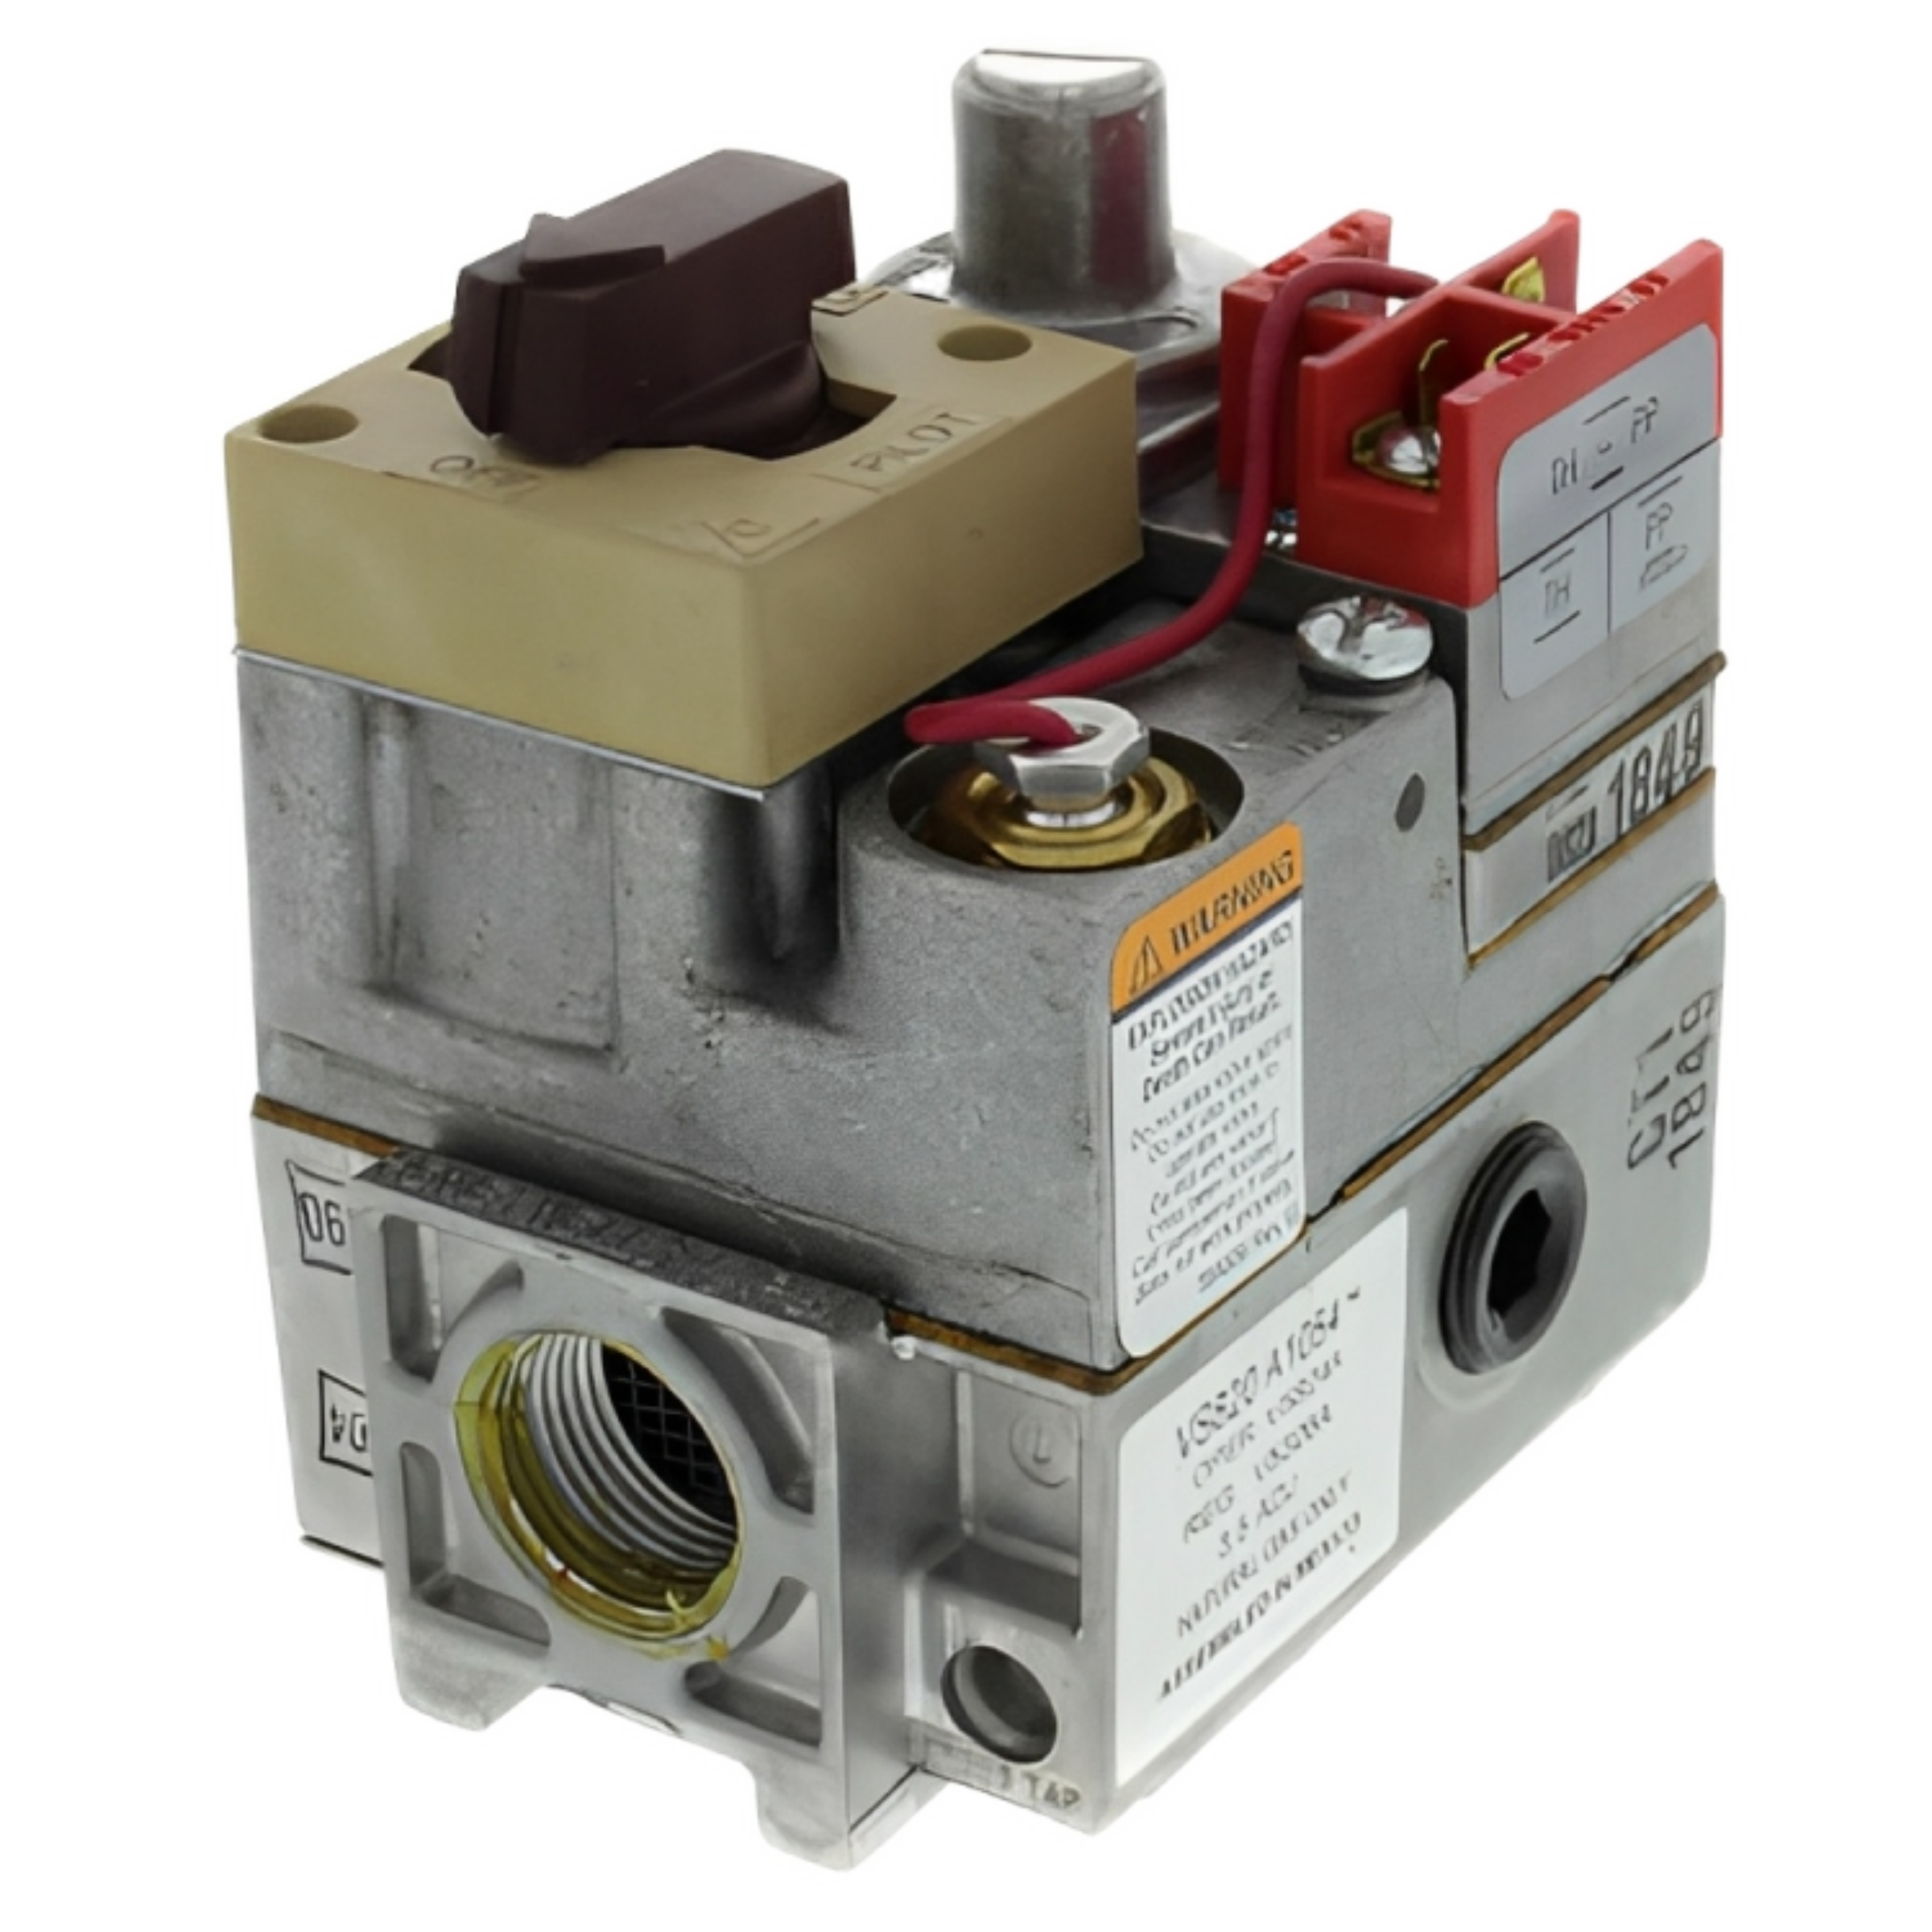 VS820A1054 Honeywell Home Millivoltage Standard Opening Gas Valve. 750mV , 3/4 x 3/4" with 1/2" side outlets. Set 3.5" WC. Max Capacity 425,000 BTU/hr